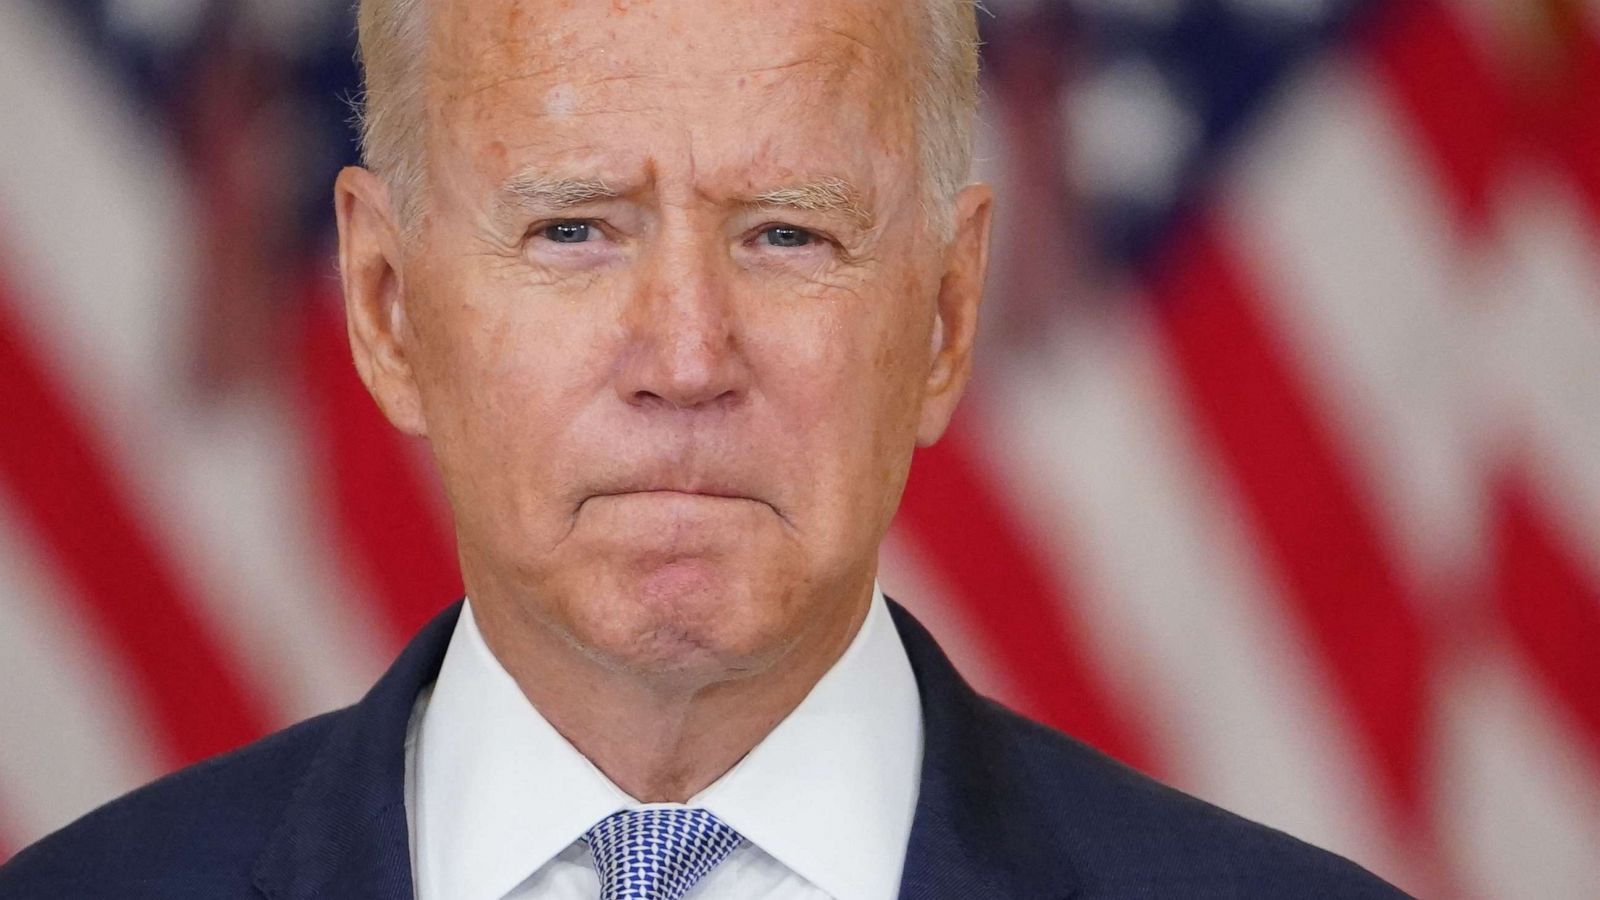 Charges laid over a Sydney house fire .. and a big star wants Joe Biden gone.